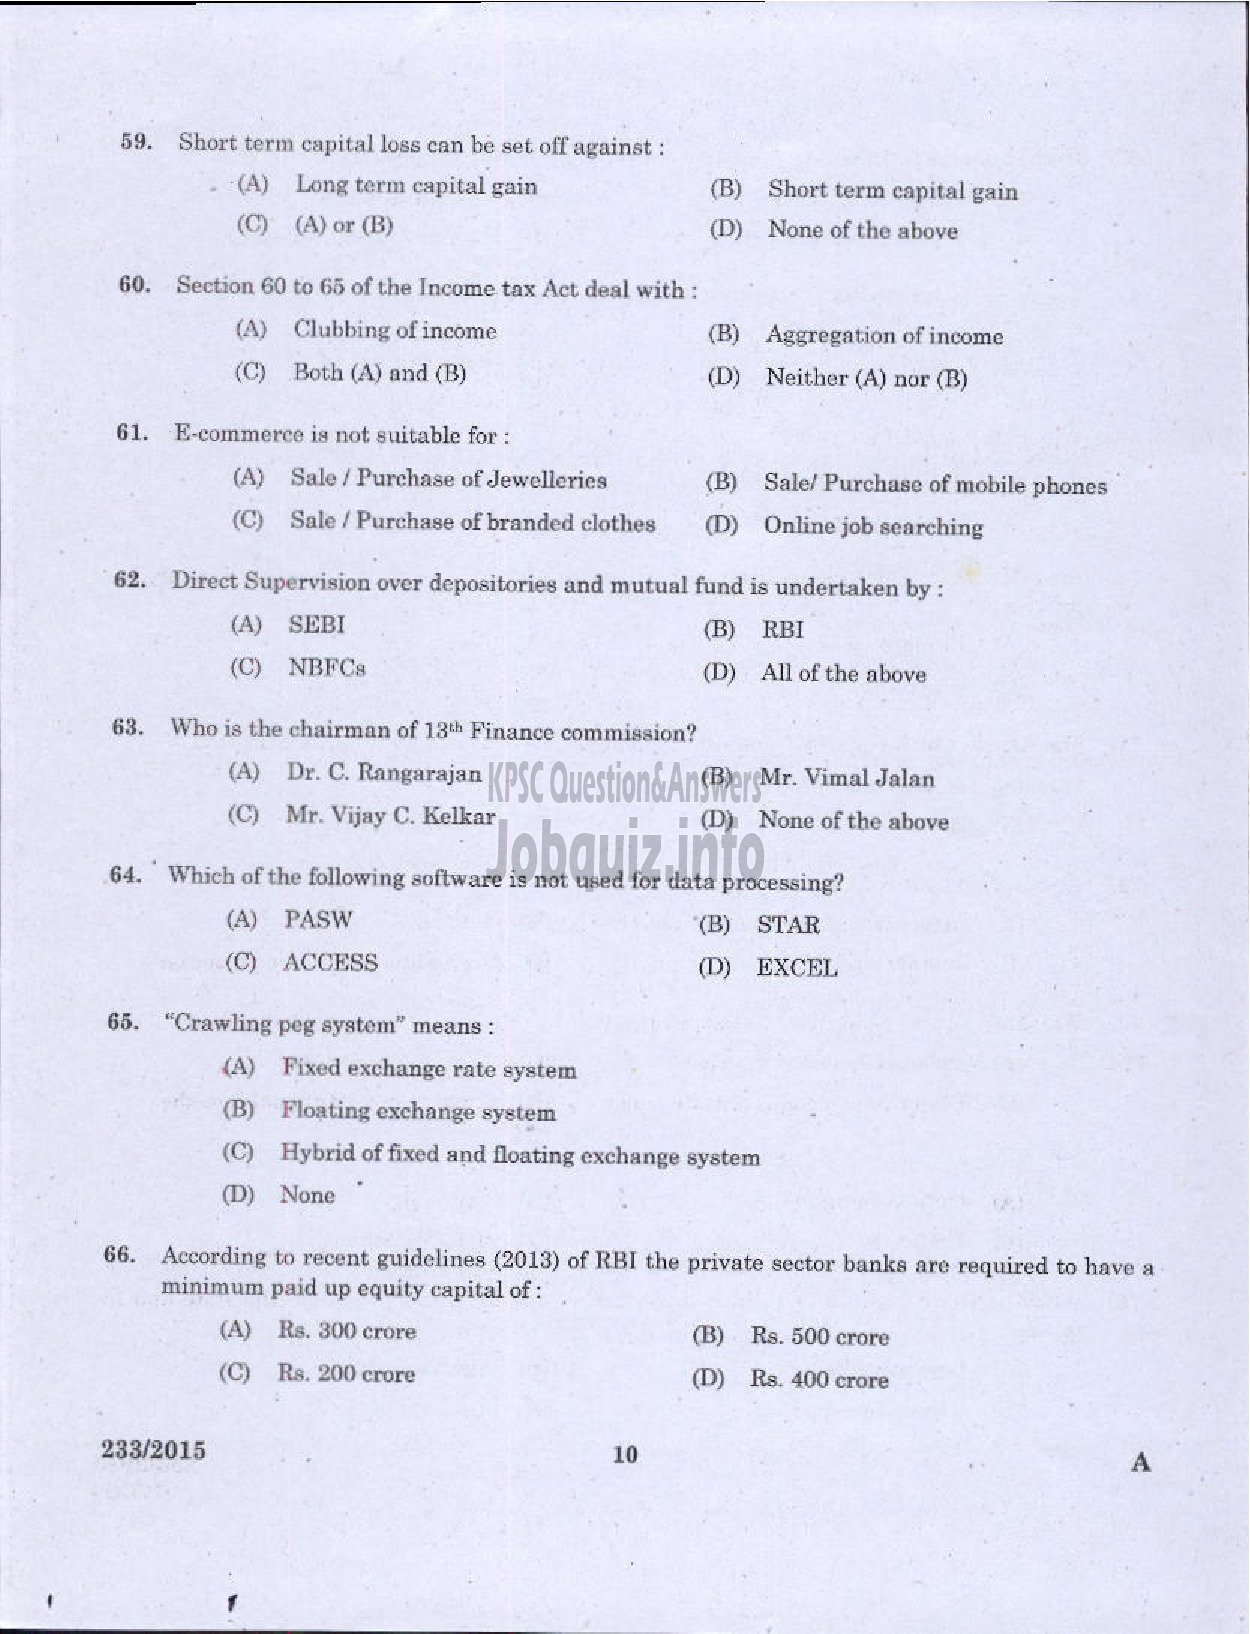 Kerala PSC Question Paper - LECTURER IN COMMERCE TECHNICAL EDUCATION-8